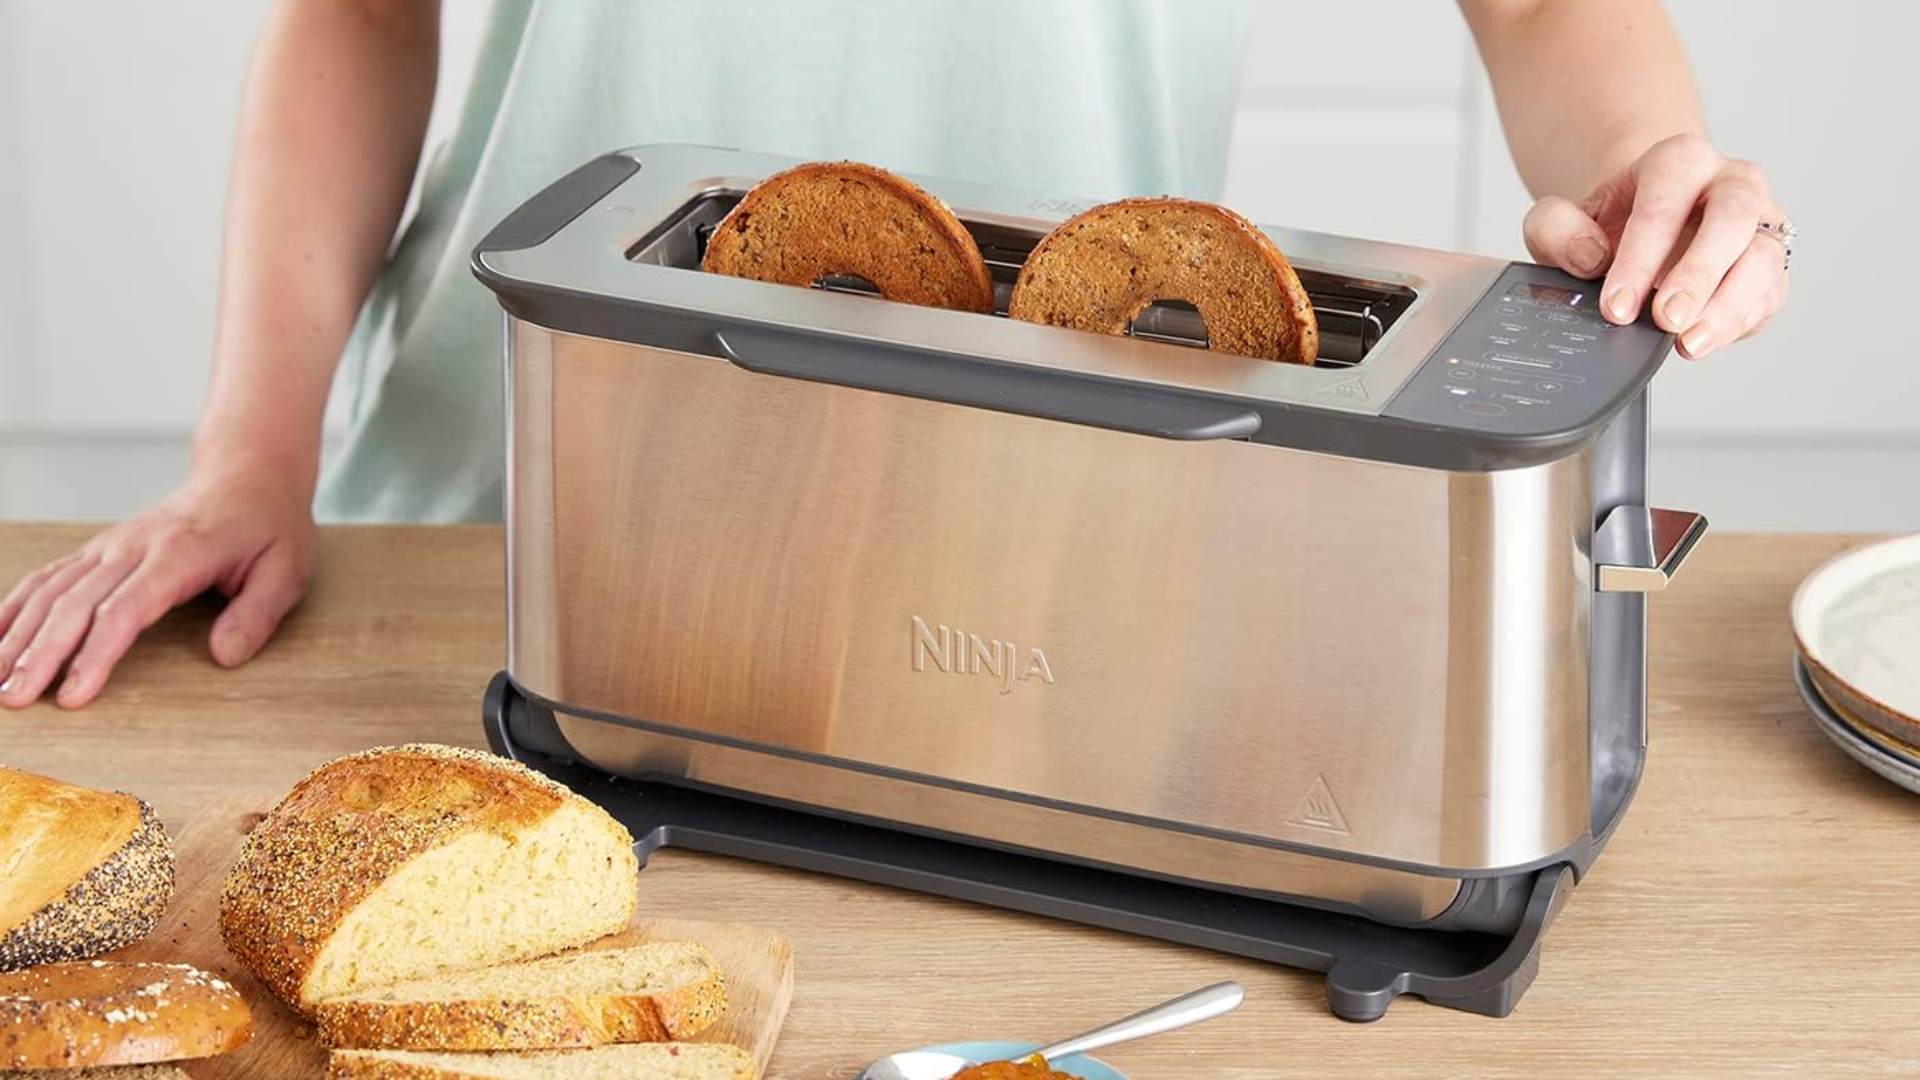 Ninja’s 3-in-1 Toaster just plummeted to a new low price